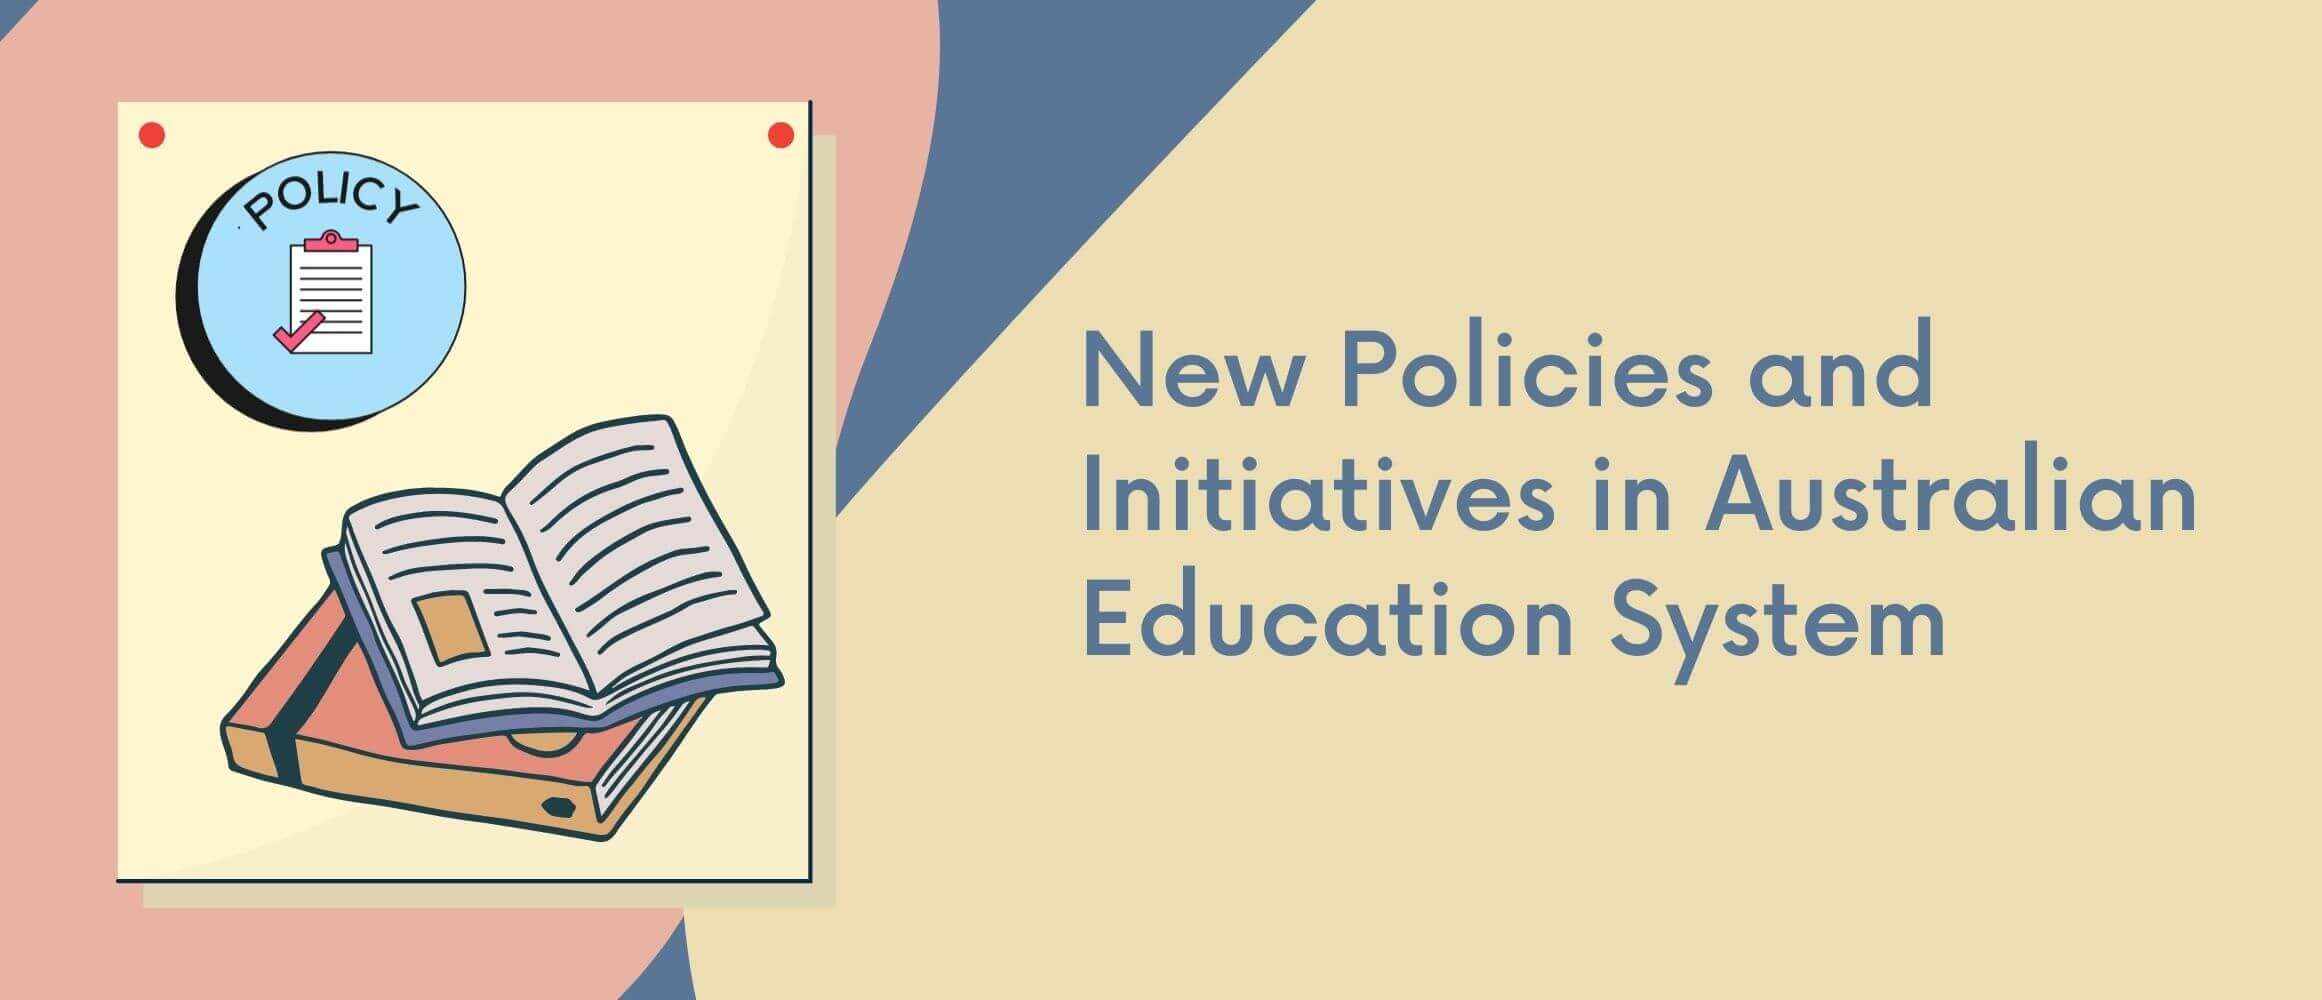 New Policies and Initiatives in Australian Education System